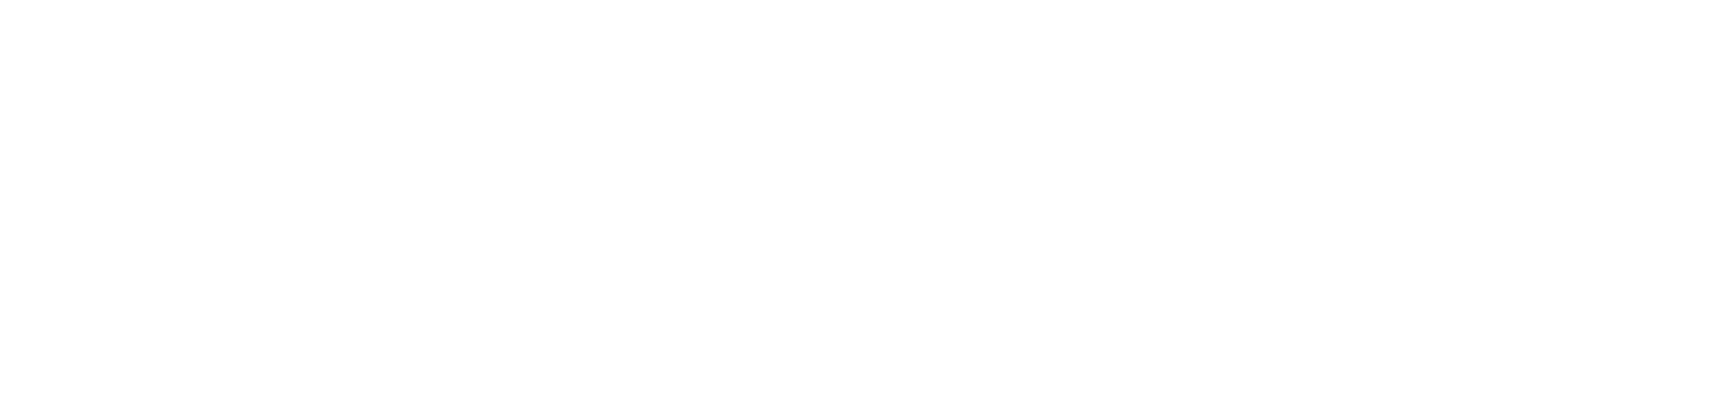 Americans' Warehouse